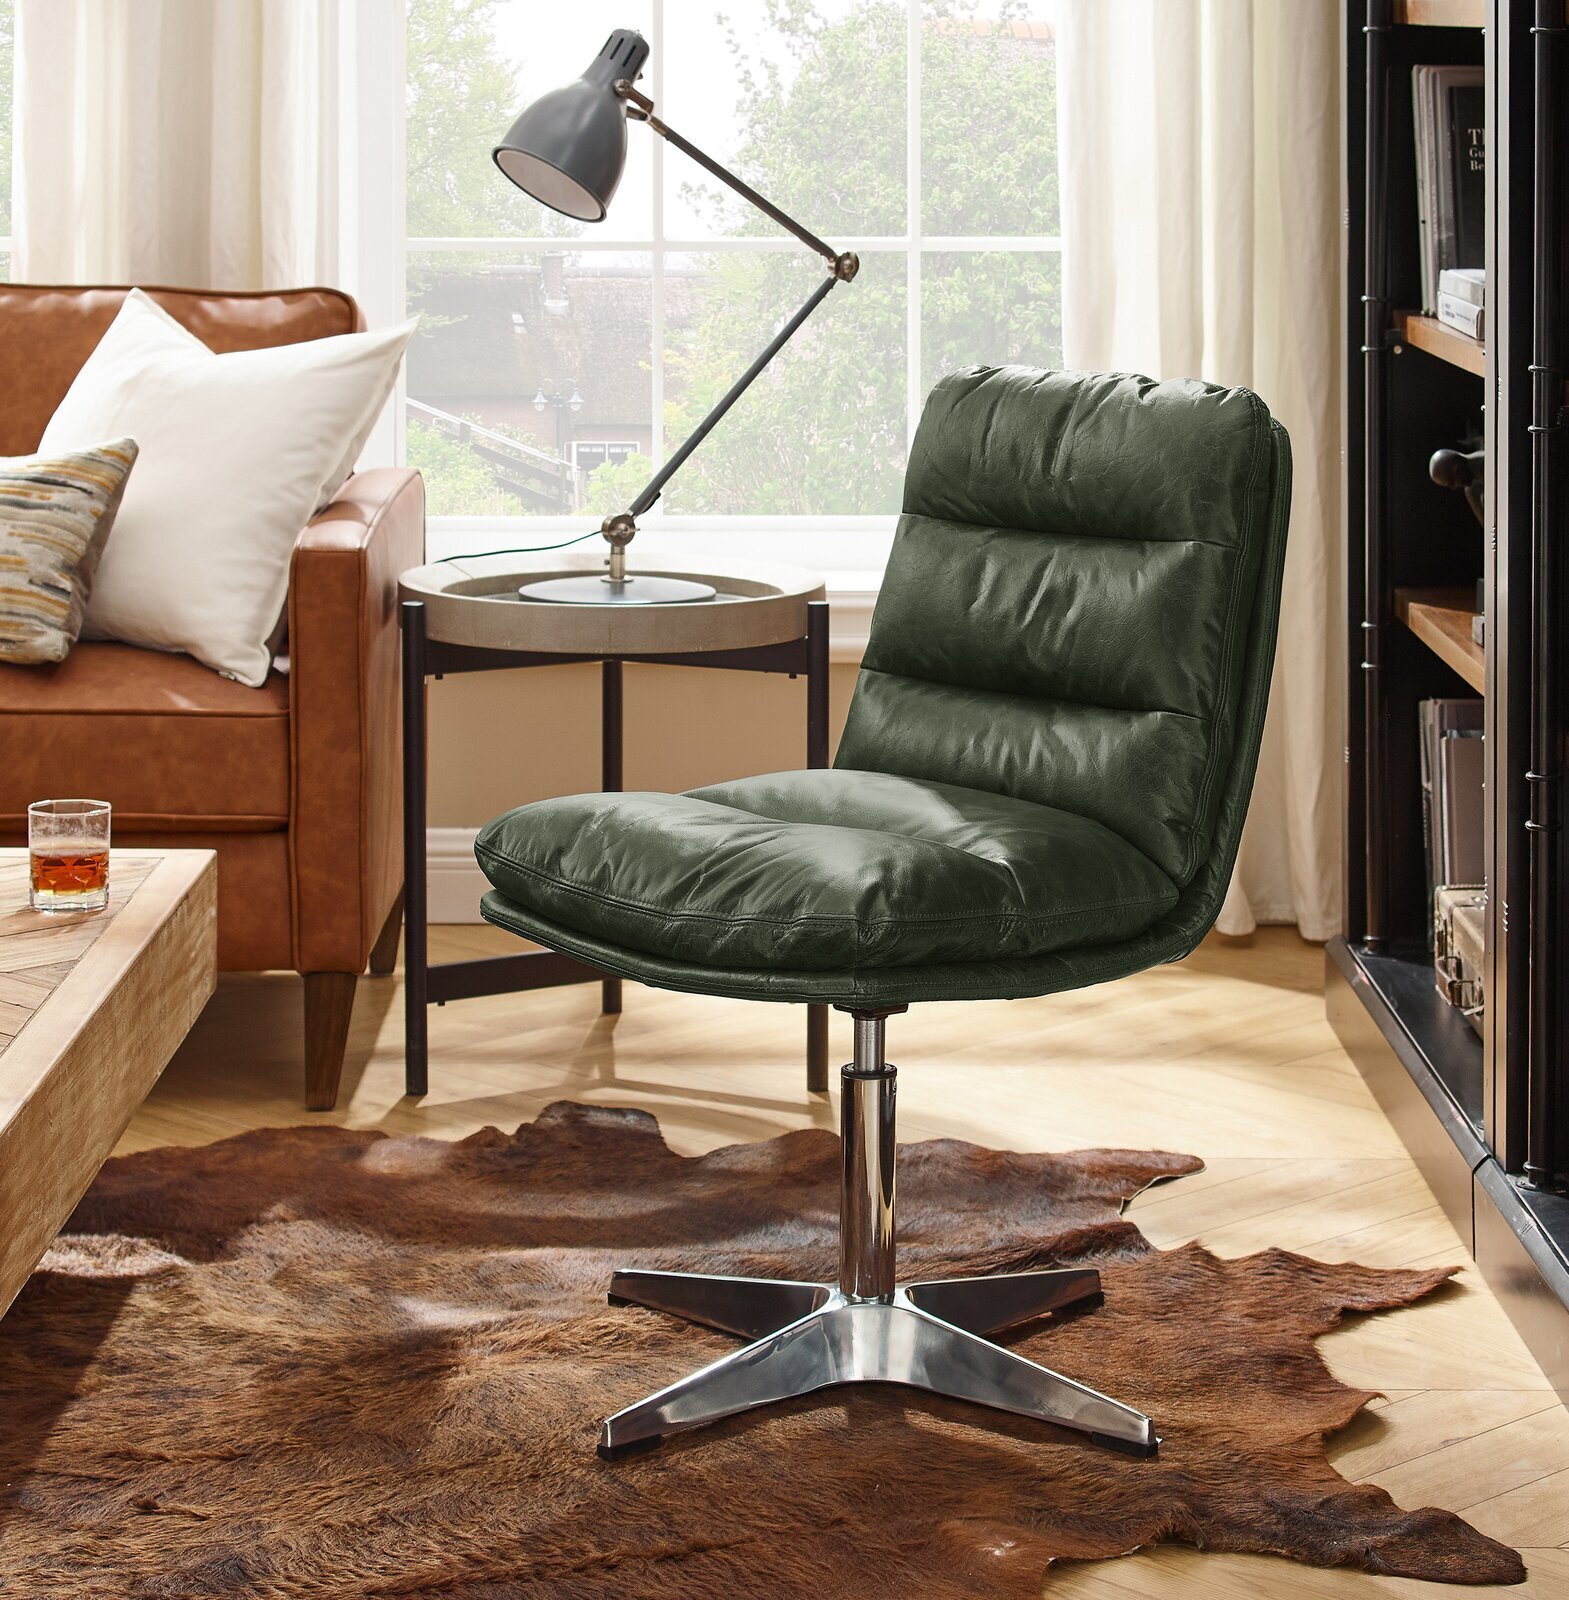 Green leather desk chair with swivel